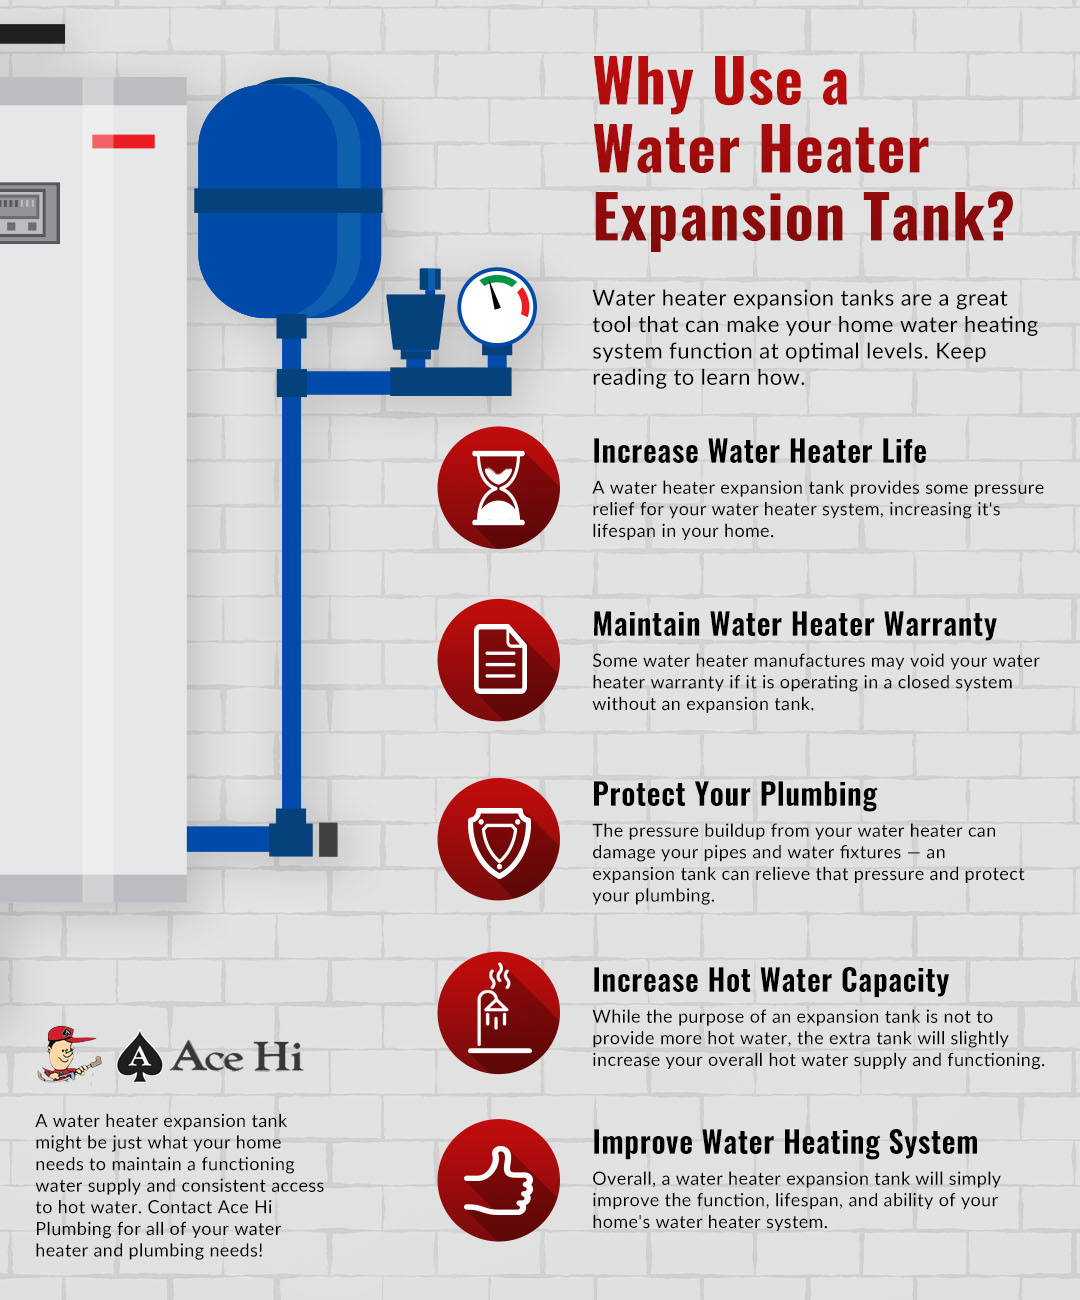 why-use-a-water-heater-wxpansion-tank-5e7ccc0a04797